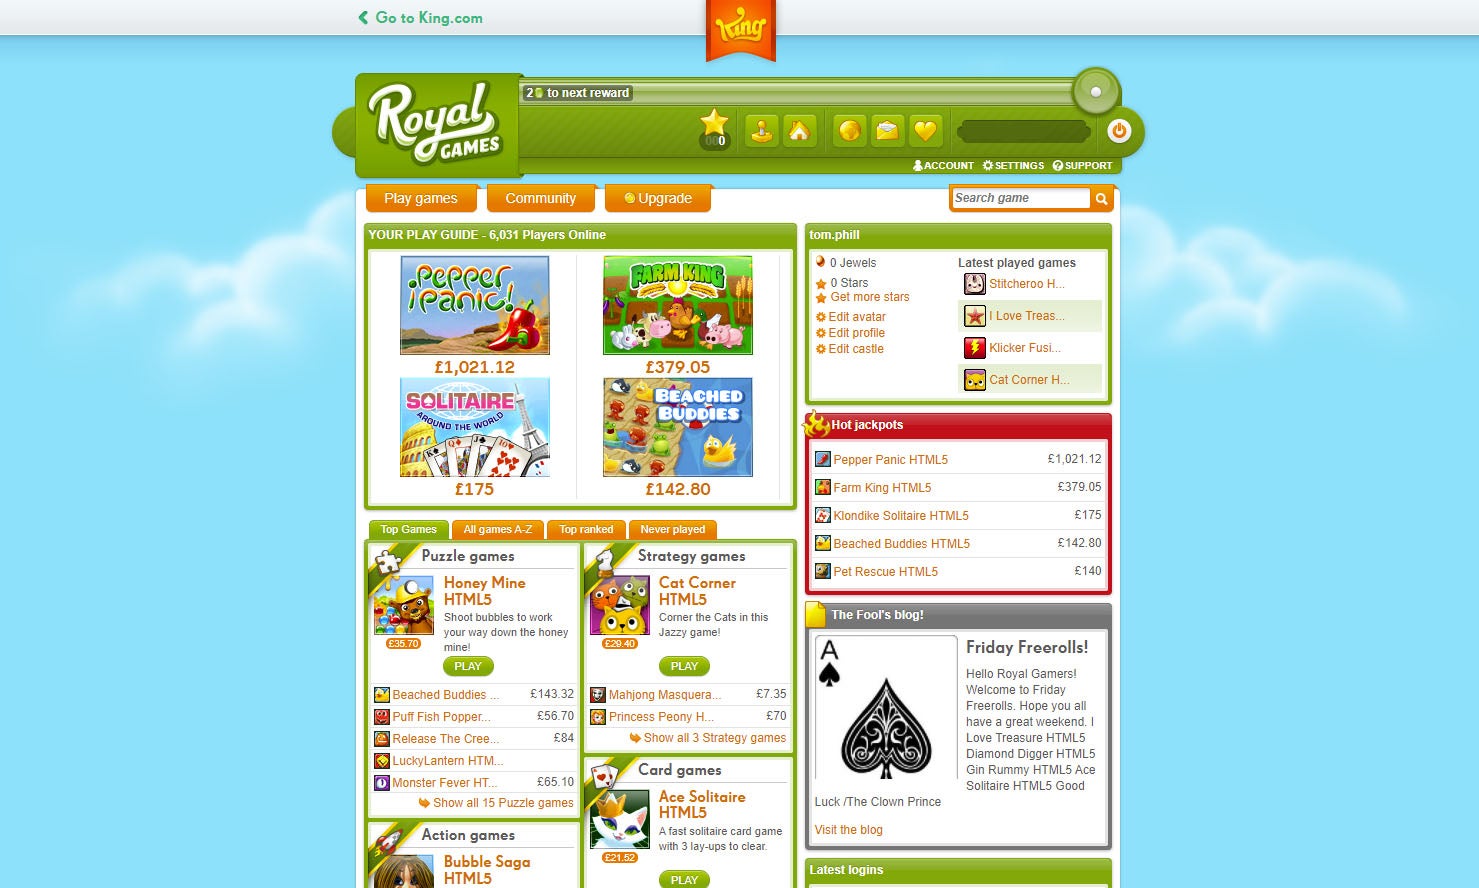 Candy Crush maker King investigated by PayPal over Royal Games site - 55